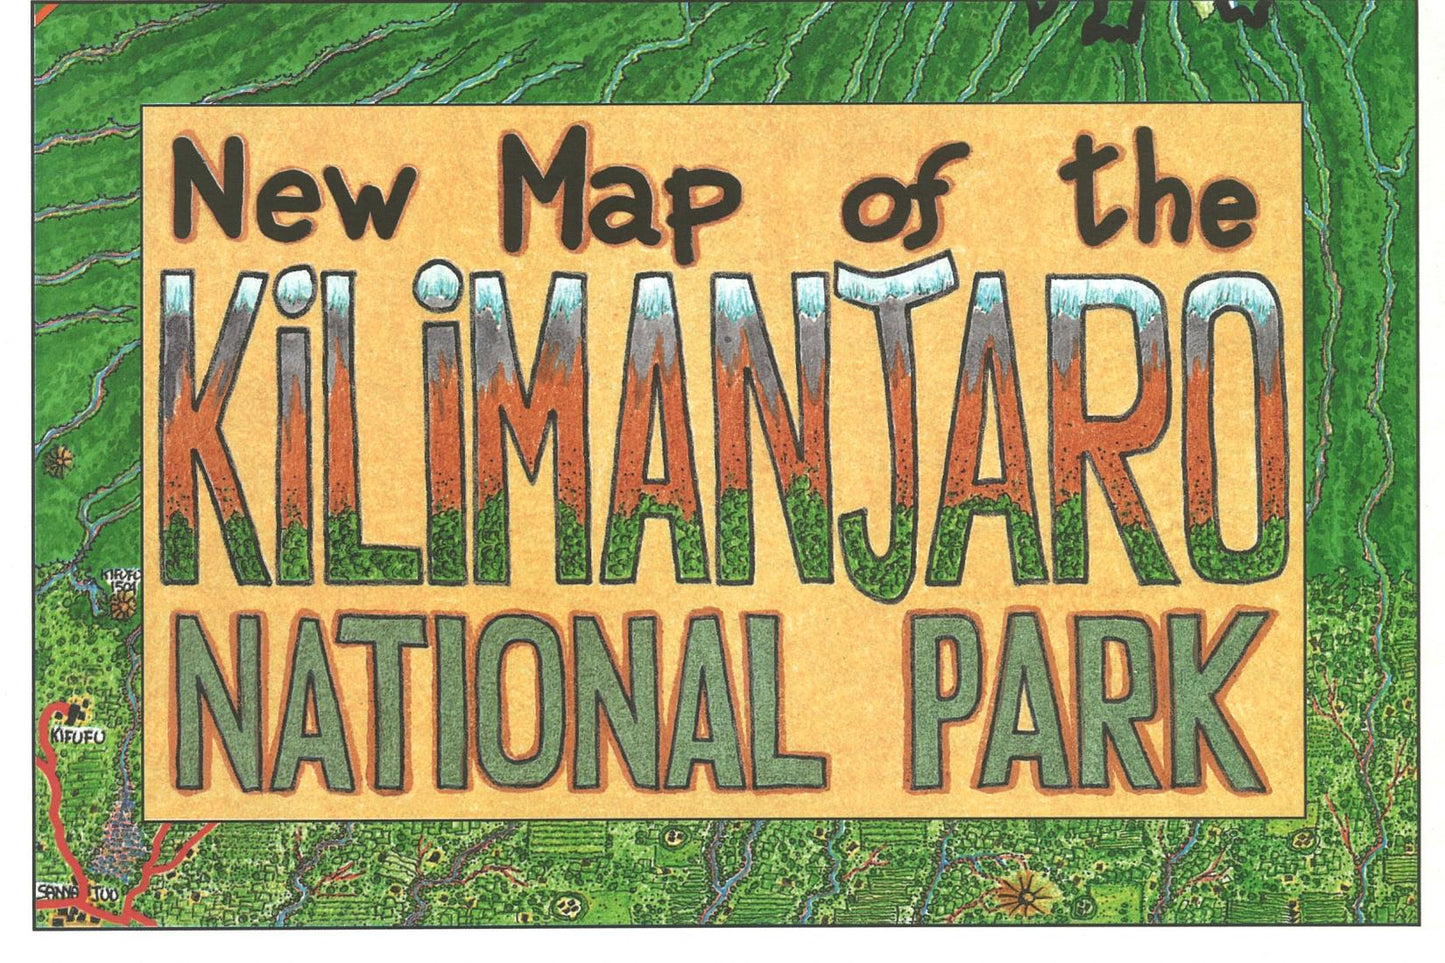 New Map of the Kilimanjaro National Park